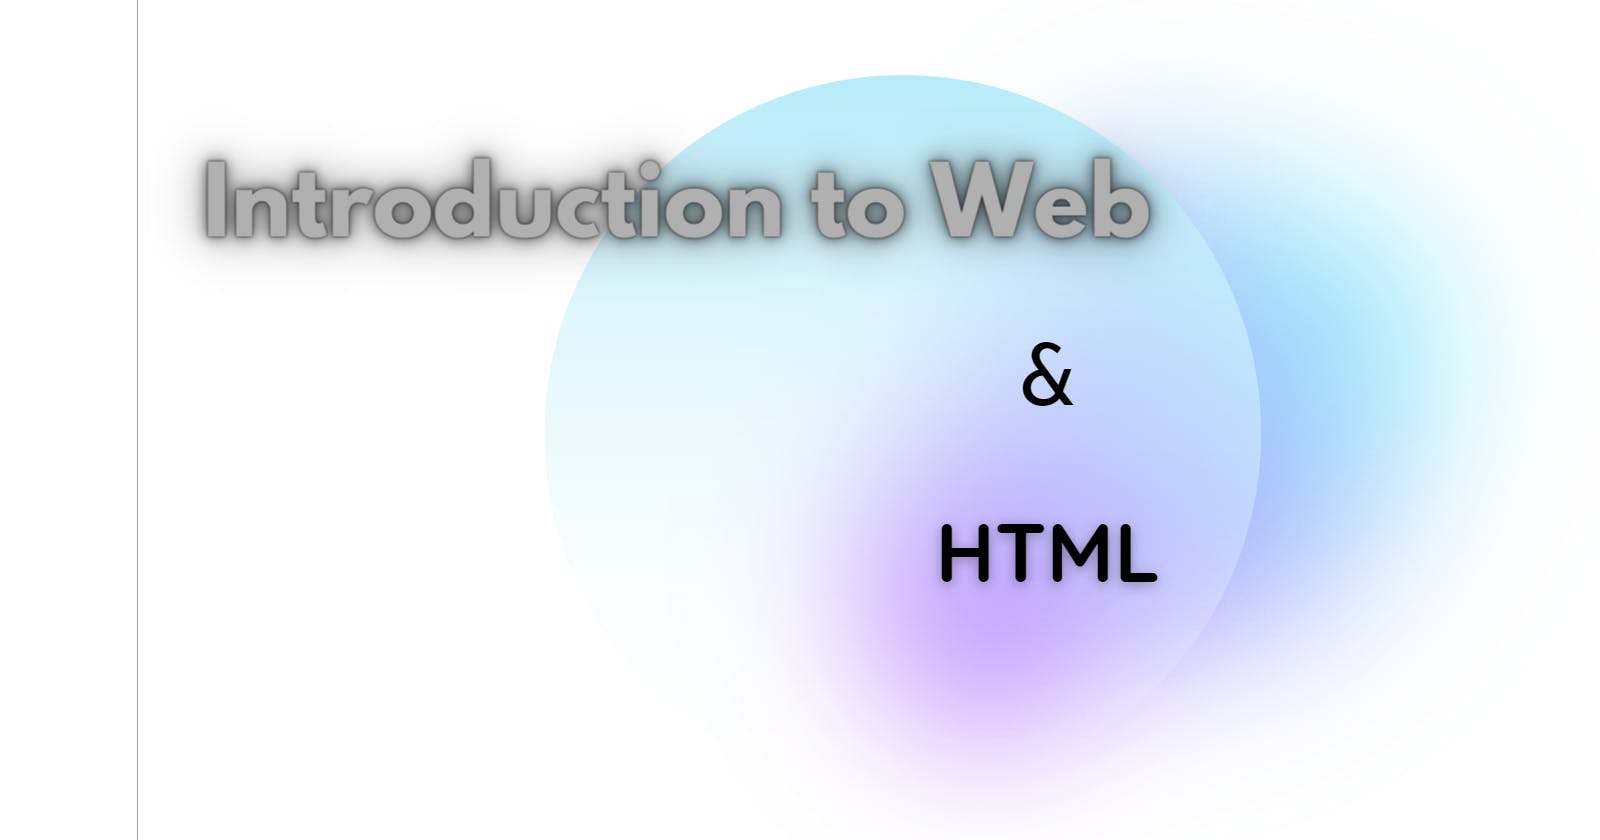 Intro to Web & HTML